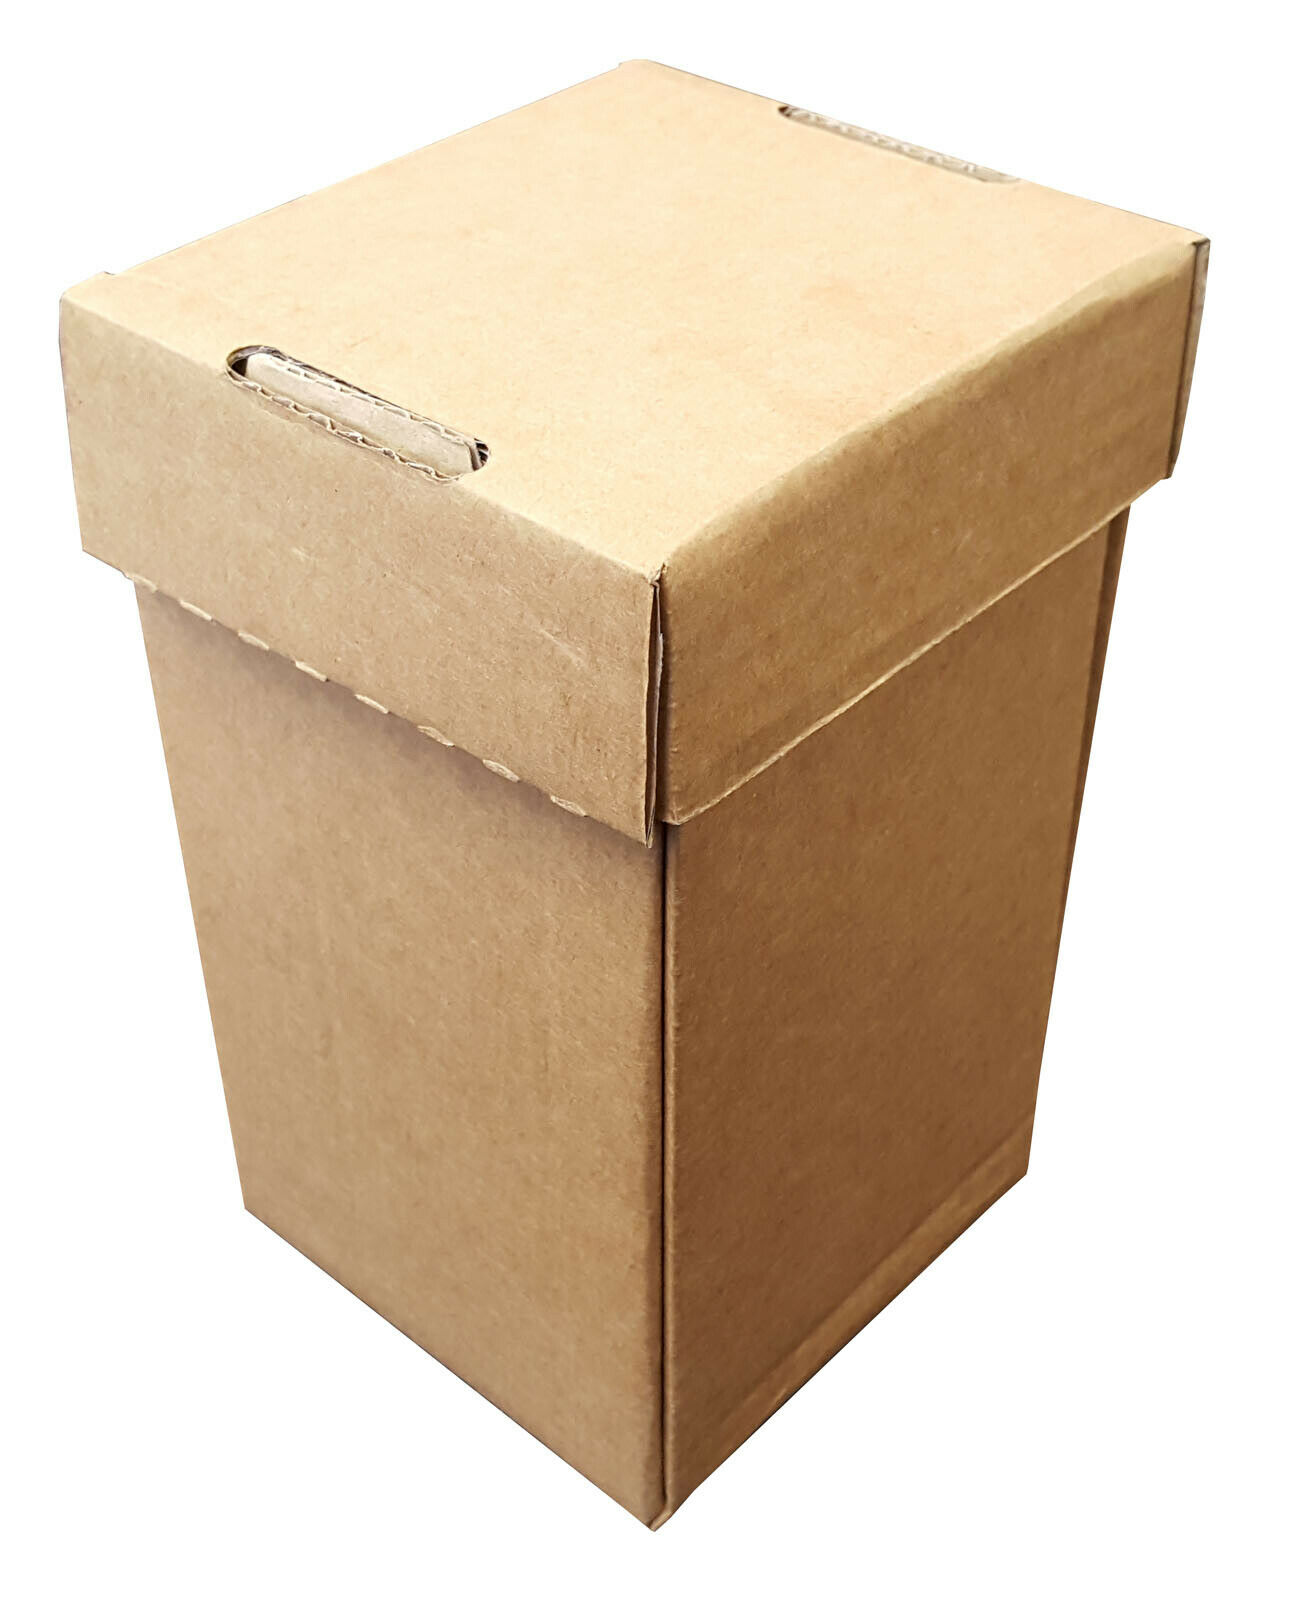 105mm x 105mm x 180mm Postal Shipping Boxes for Fragile Items Bottles Candles